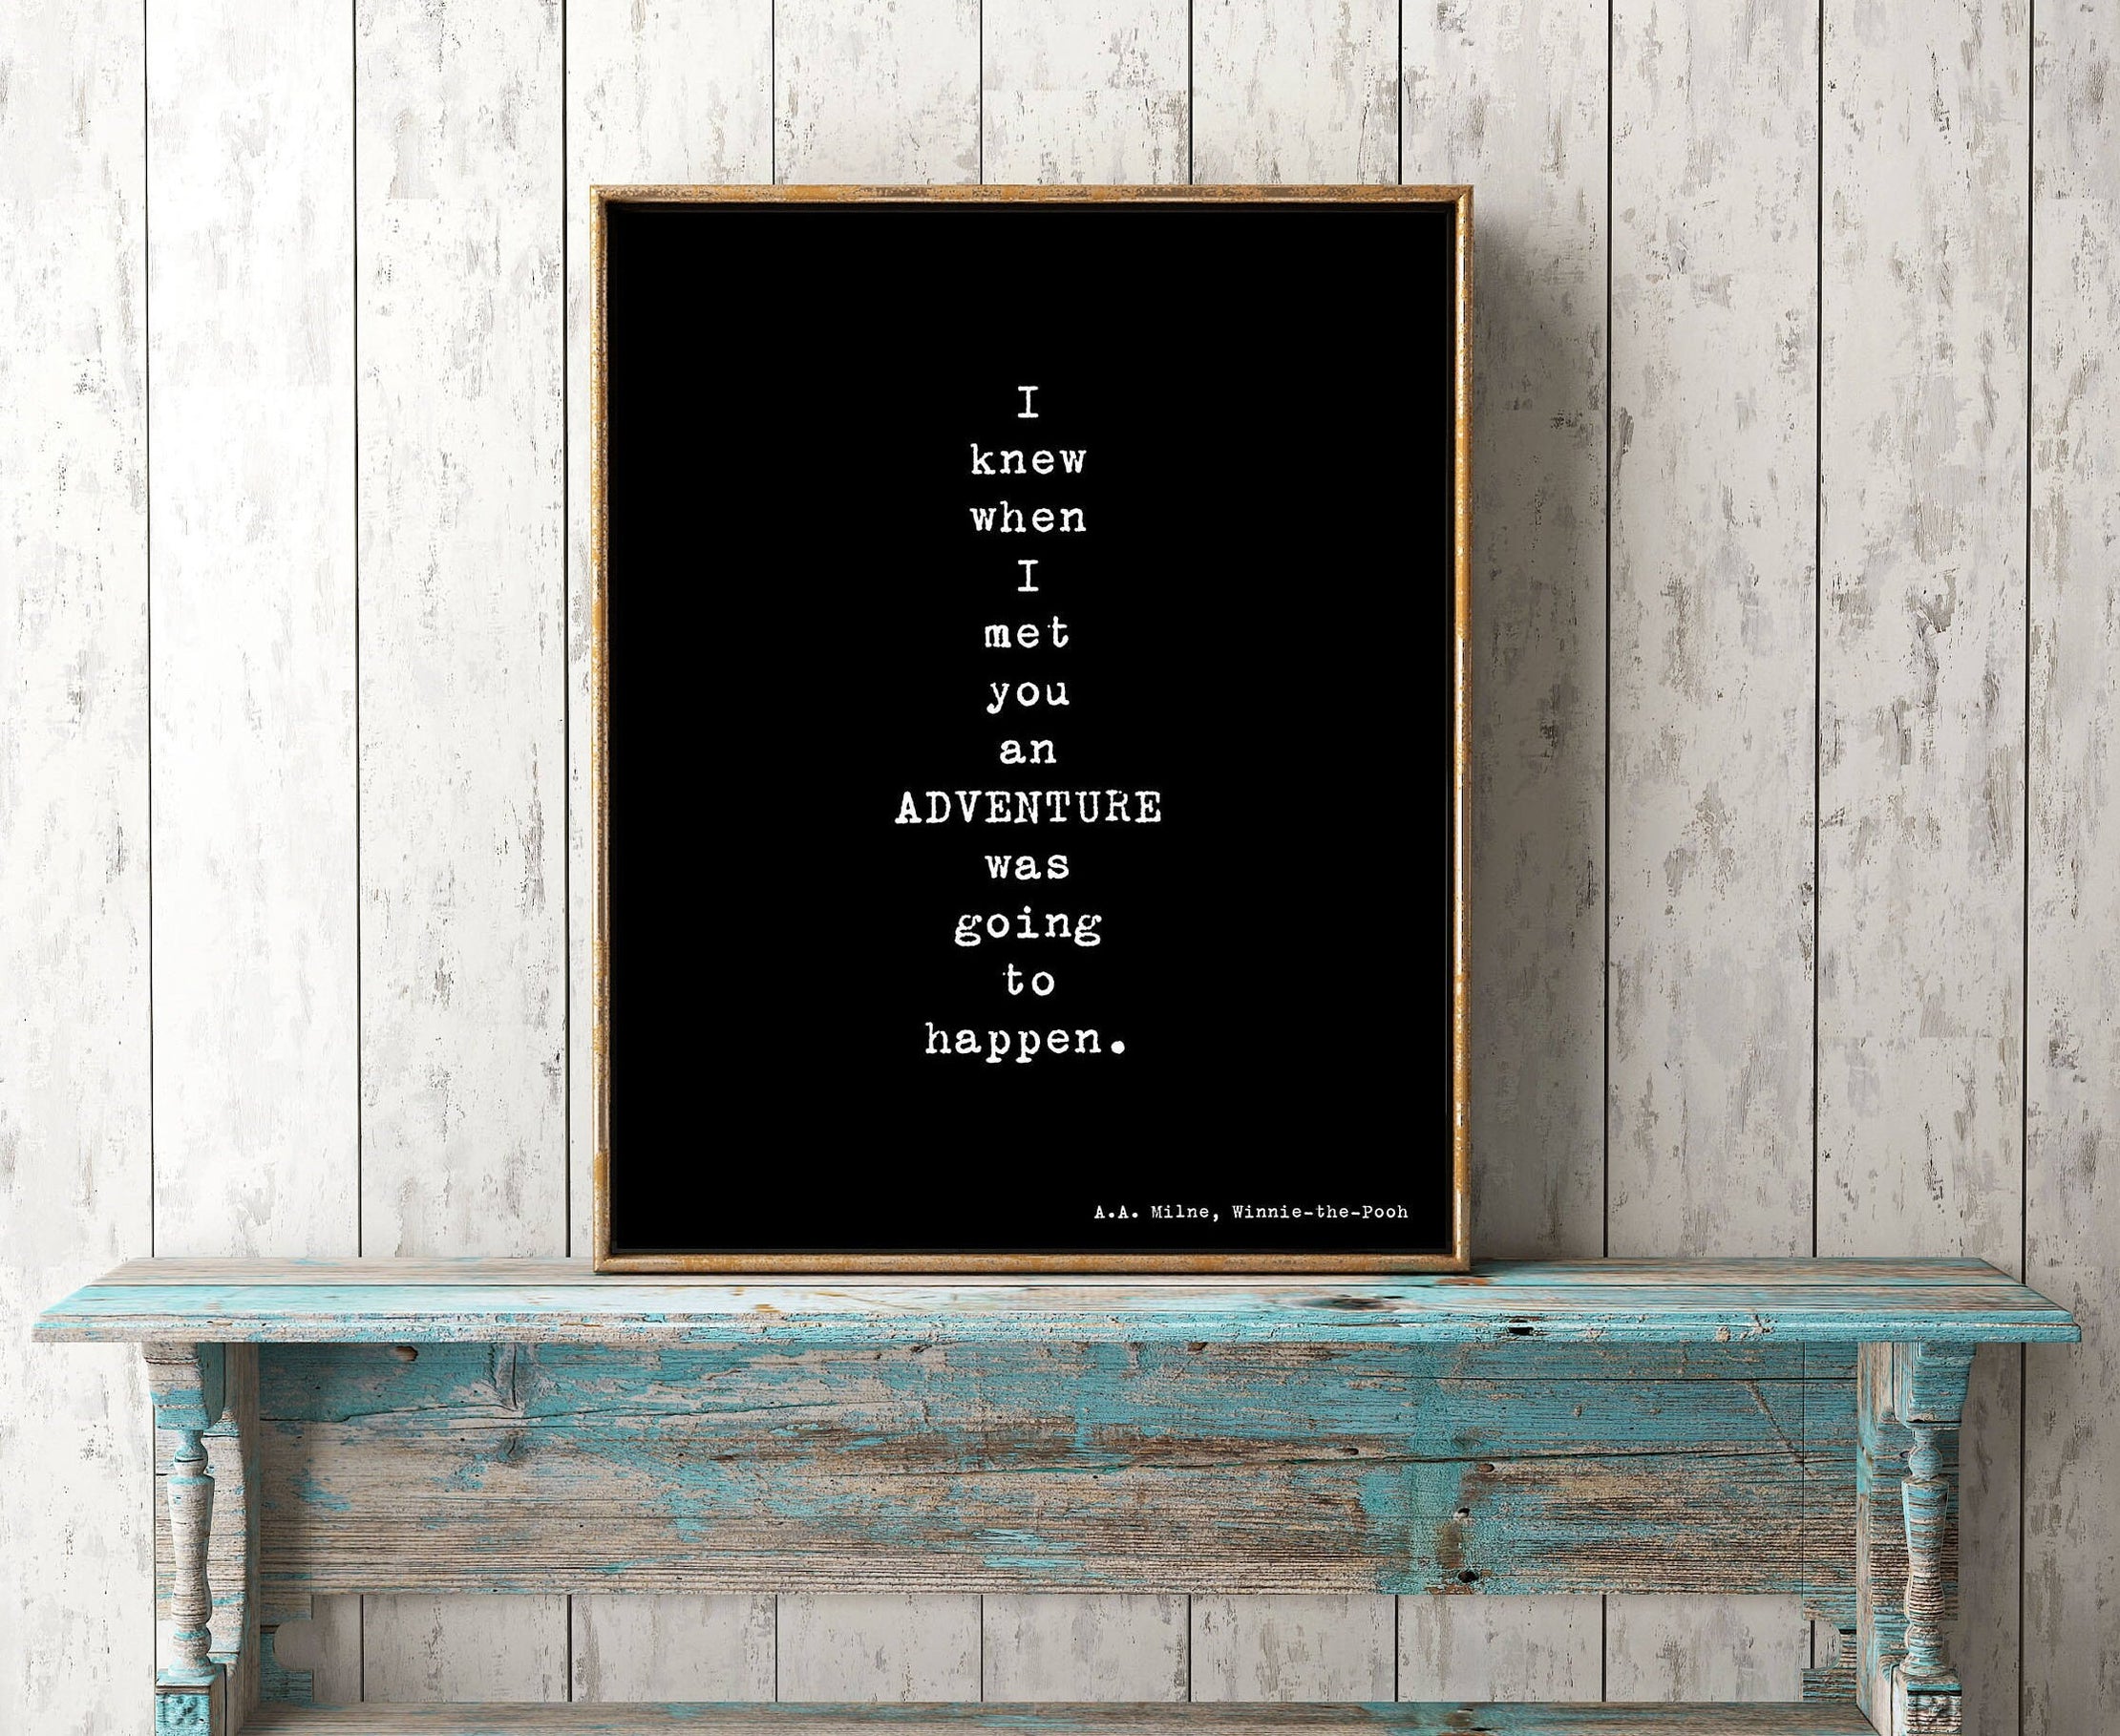 Winnie the Pooh Art Print, I knew when I met you an adventure was going to happen Quote Wall Art in black & White